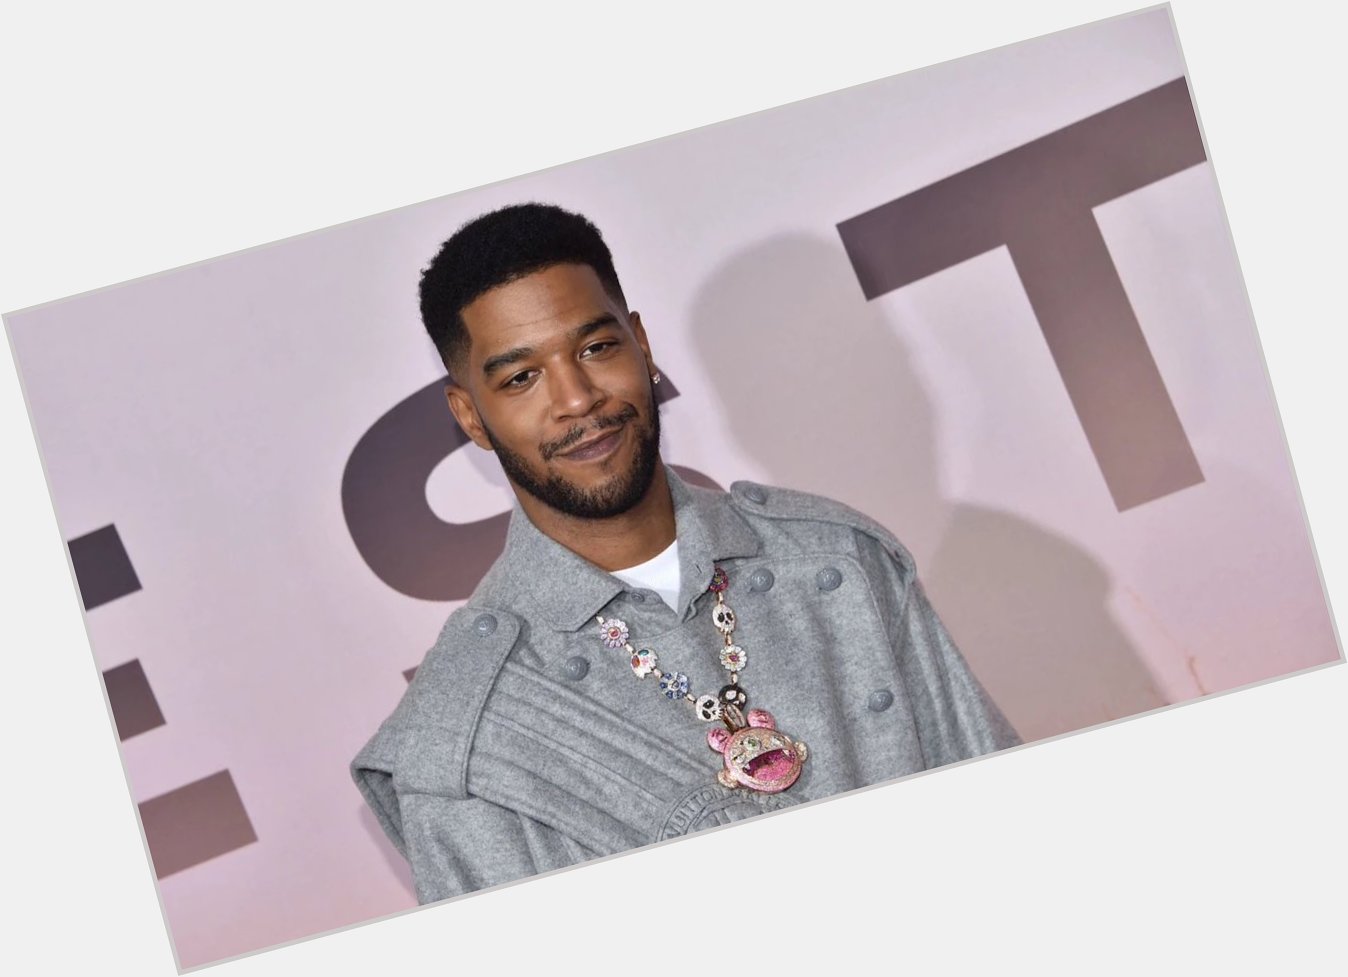 Happy 37th birthday to Kid Cudi. 

What are some of your favorite tracks?    